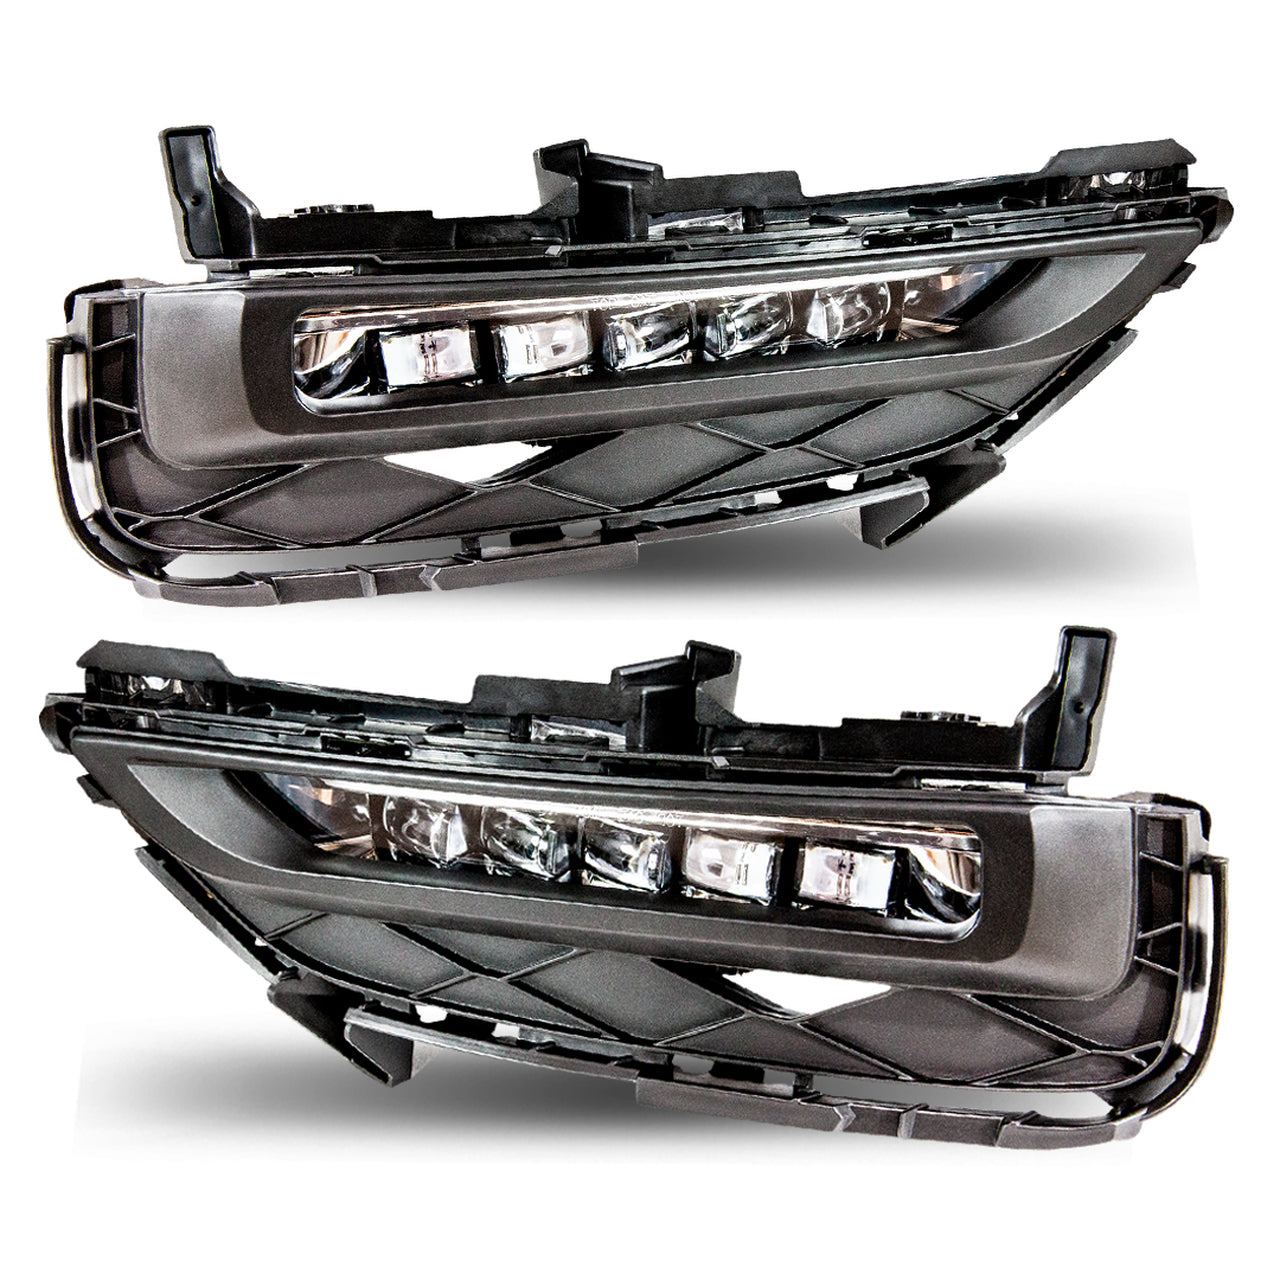 Winjet 2016-2017 Honda Accord Coupe LED Fog Lights Clear Wiring kit included WJ30-0616-09